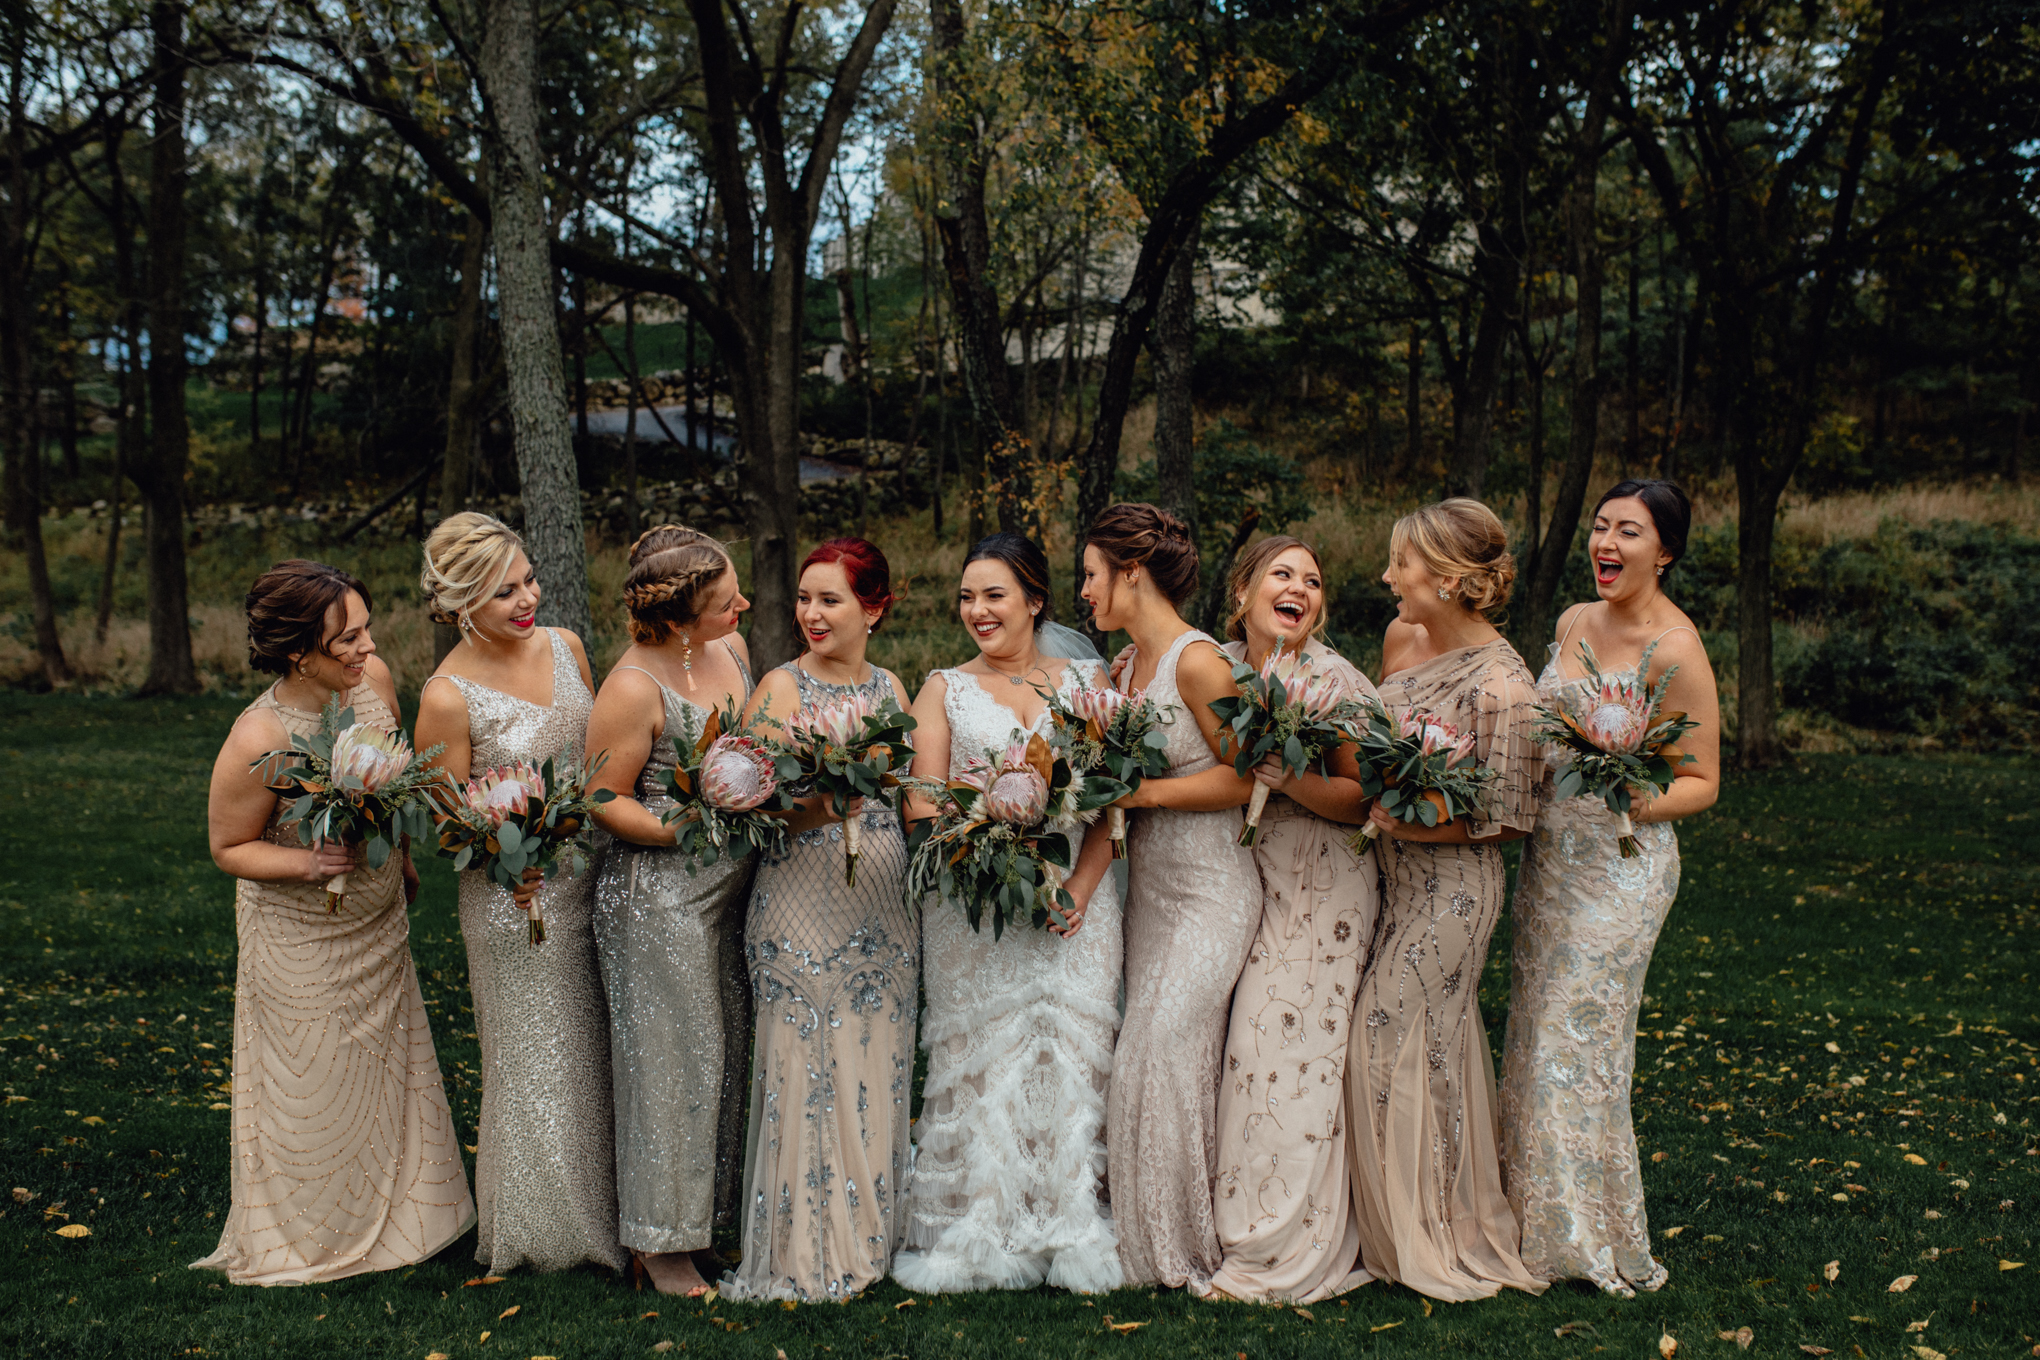  bridesmaids laughing with bouquets in grass 